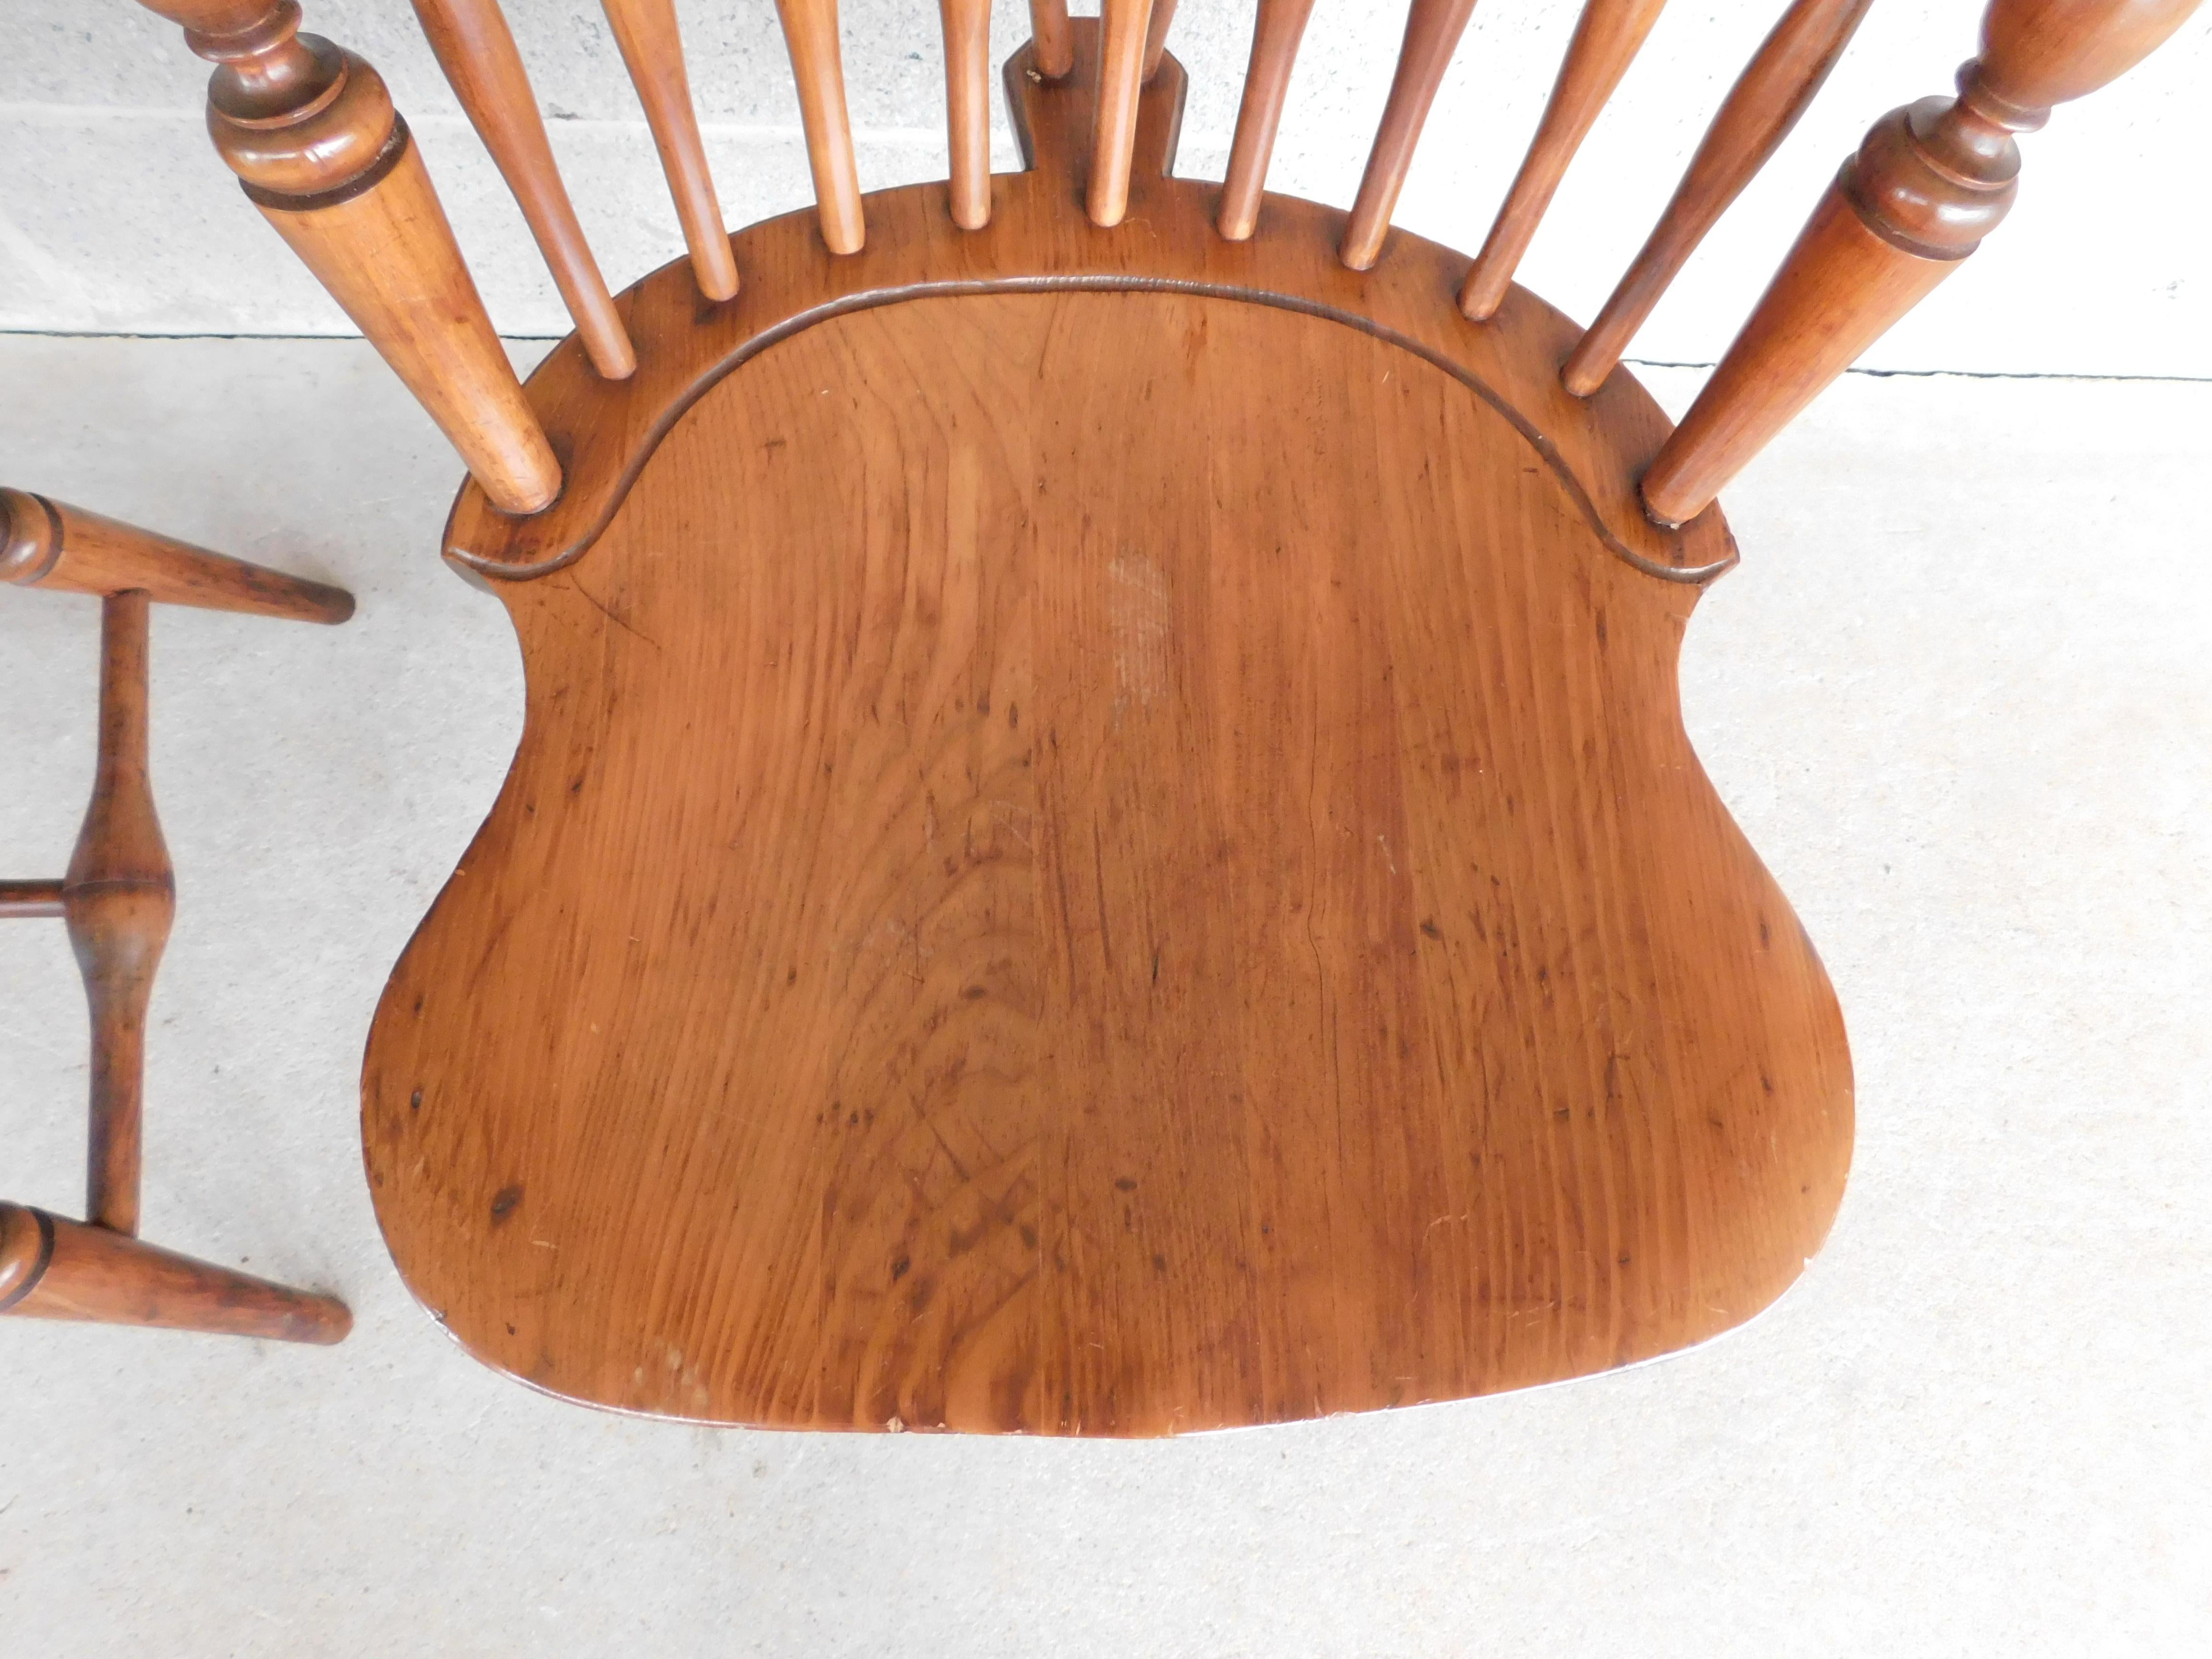 Hand-Crafted Wallace Nutting Brace Back Windsor Side Chairs #326 - Set of 4